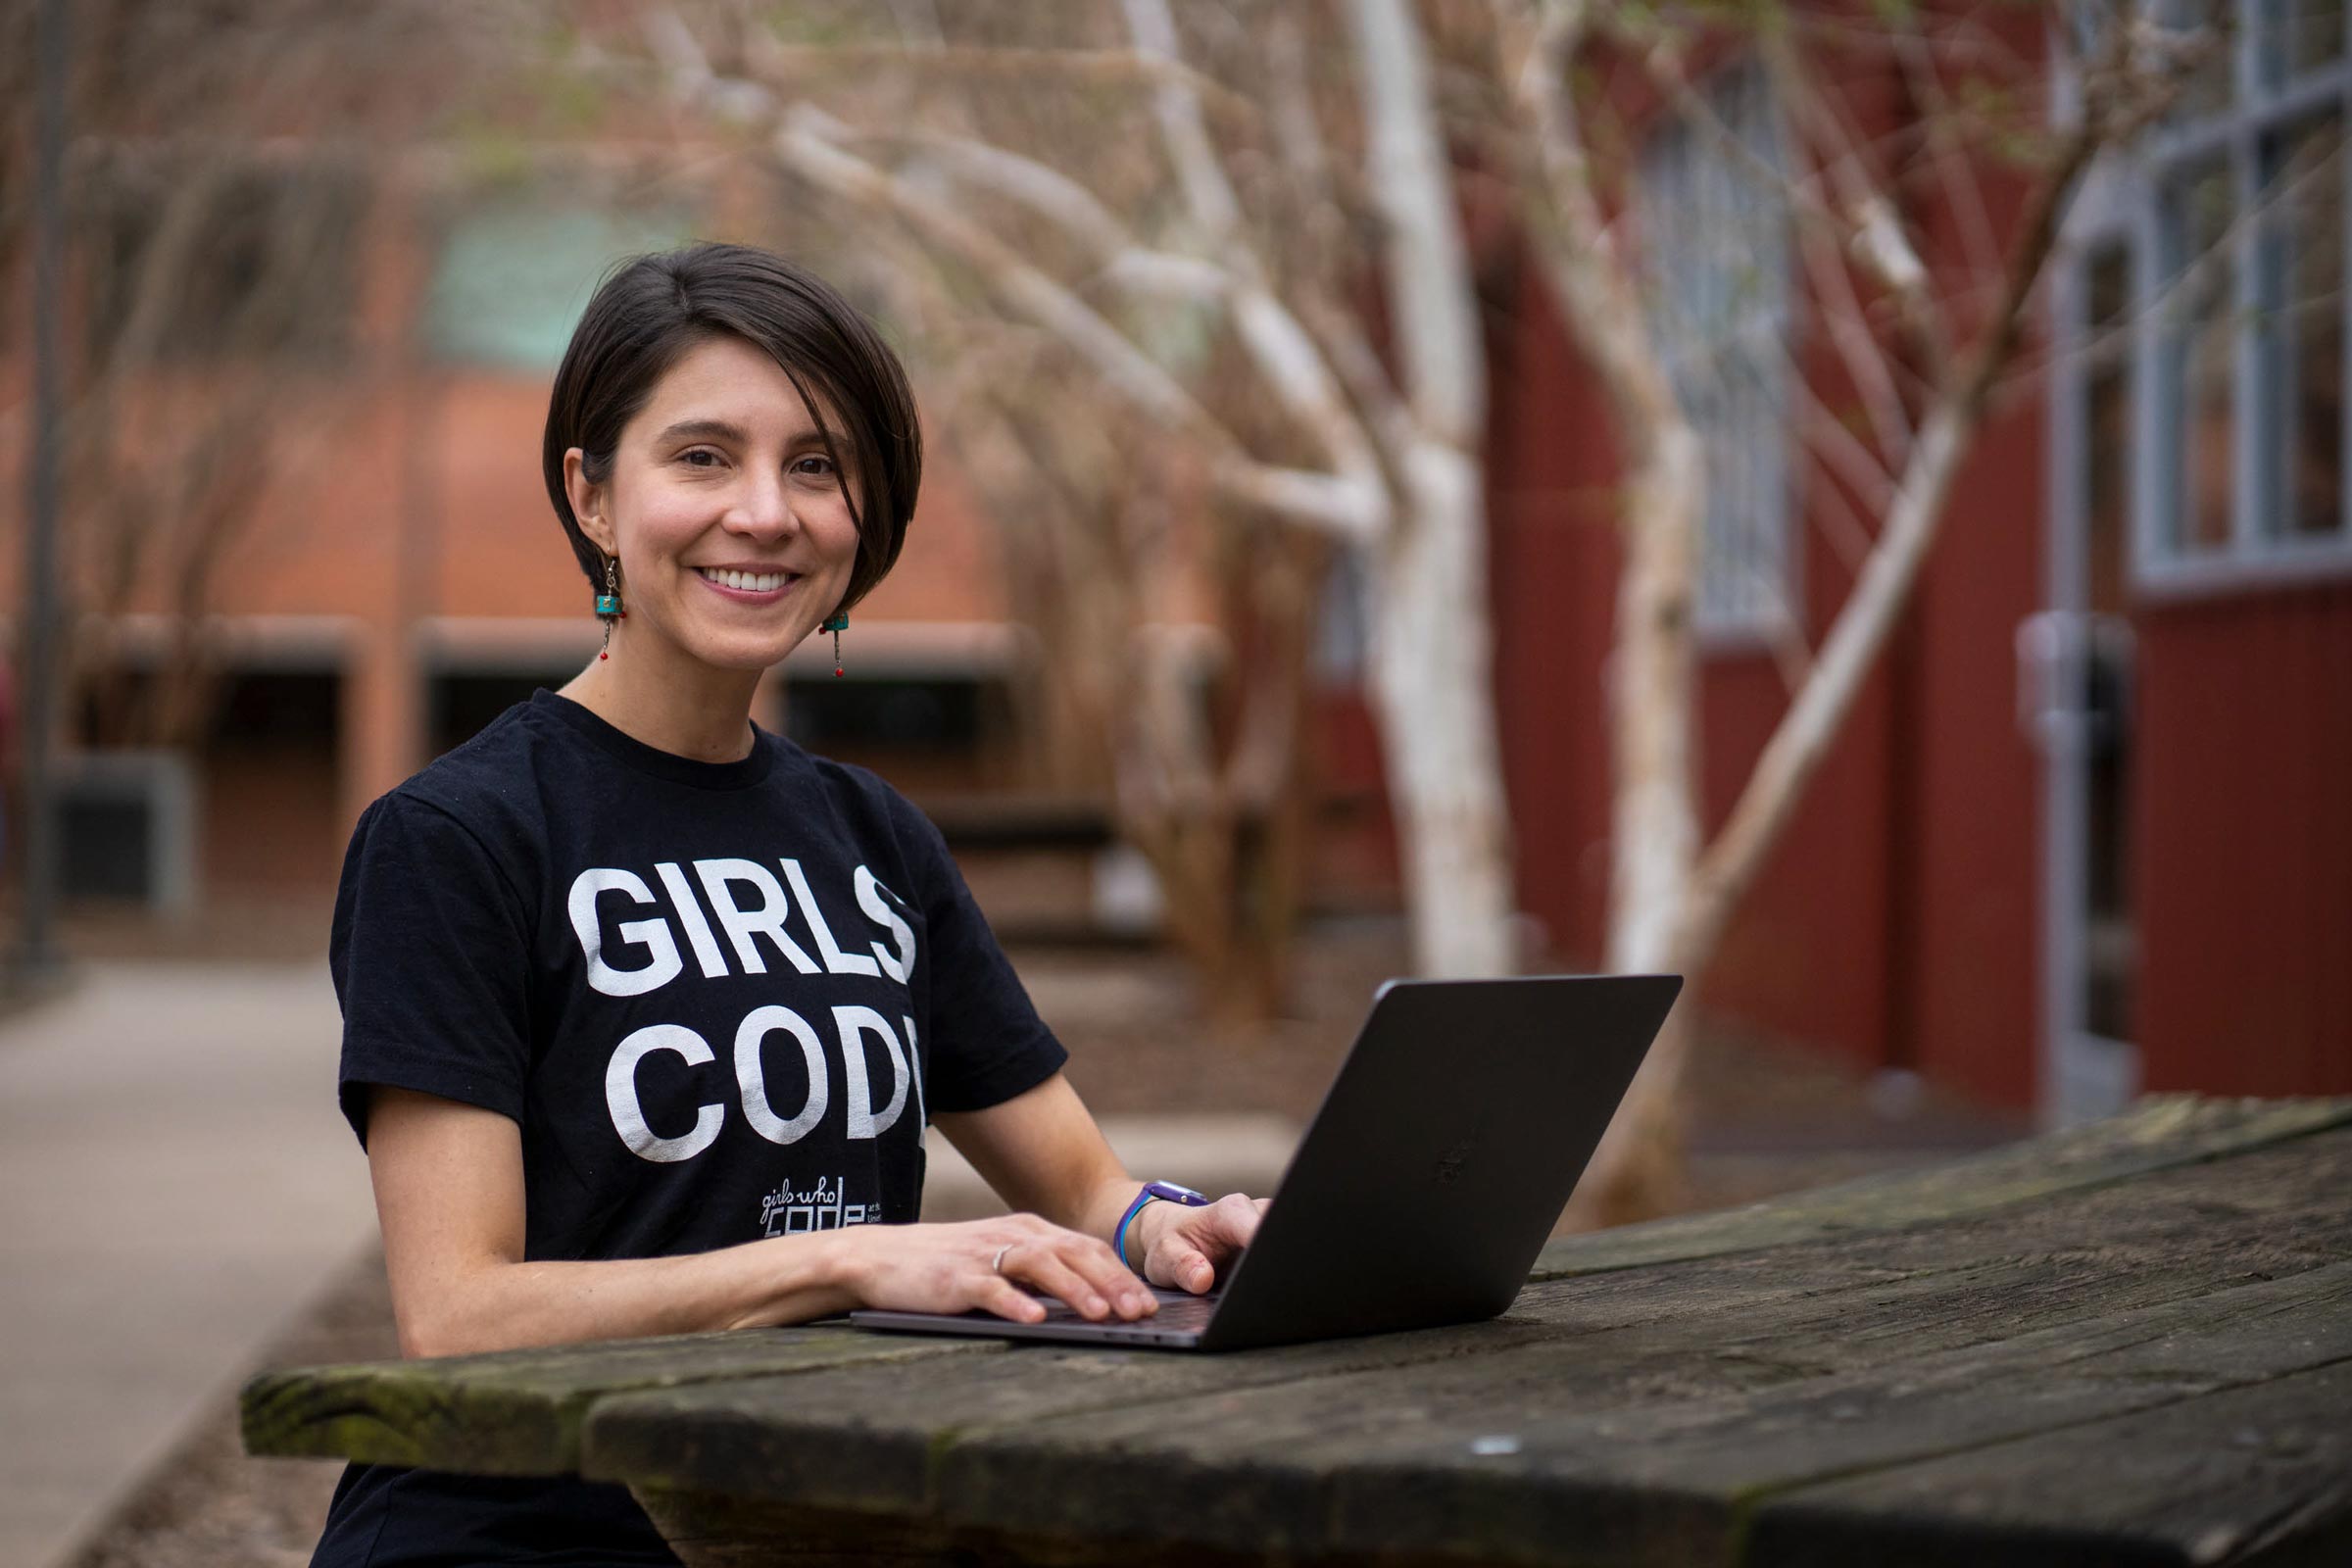 photo of a woman with short black hair and a black shirt sitting at a table with a laptop